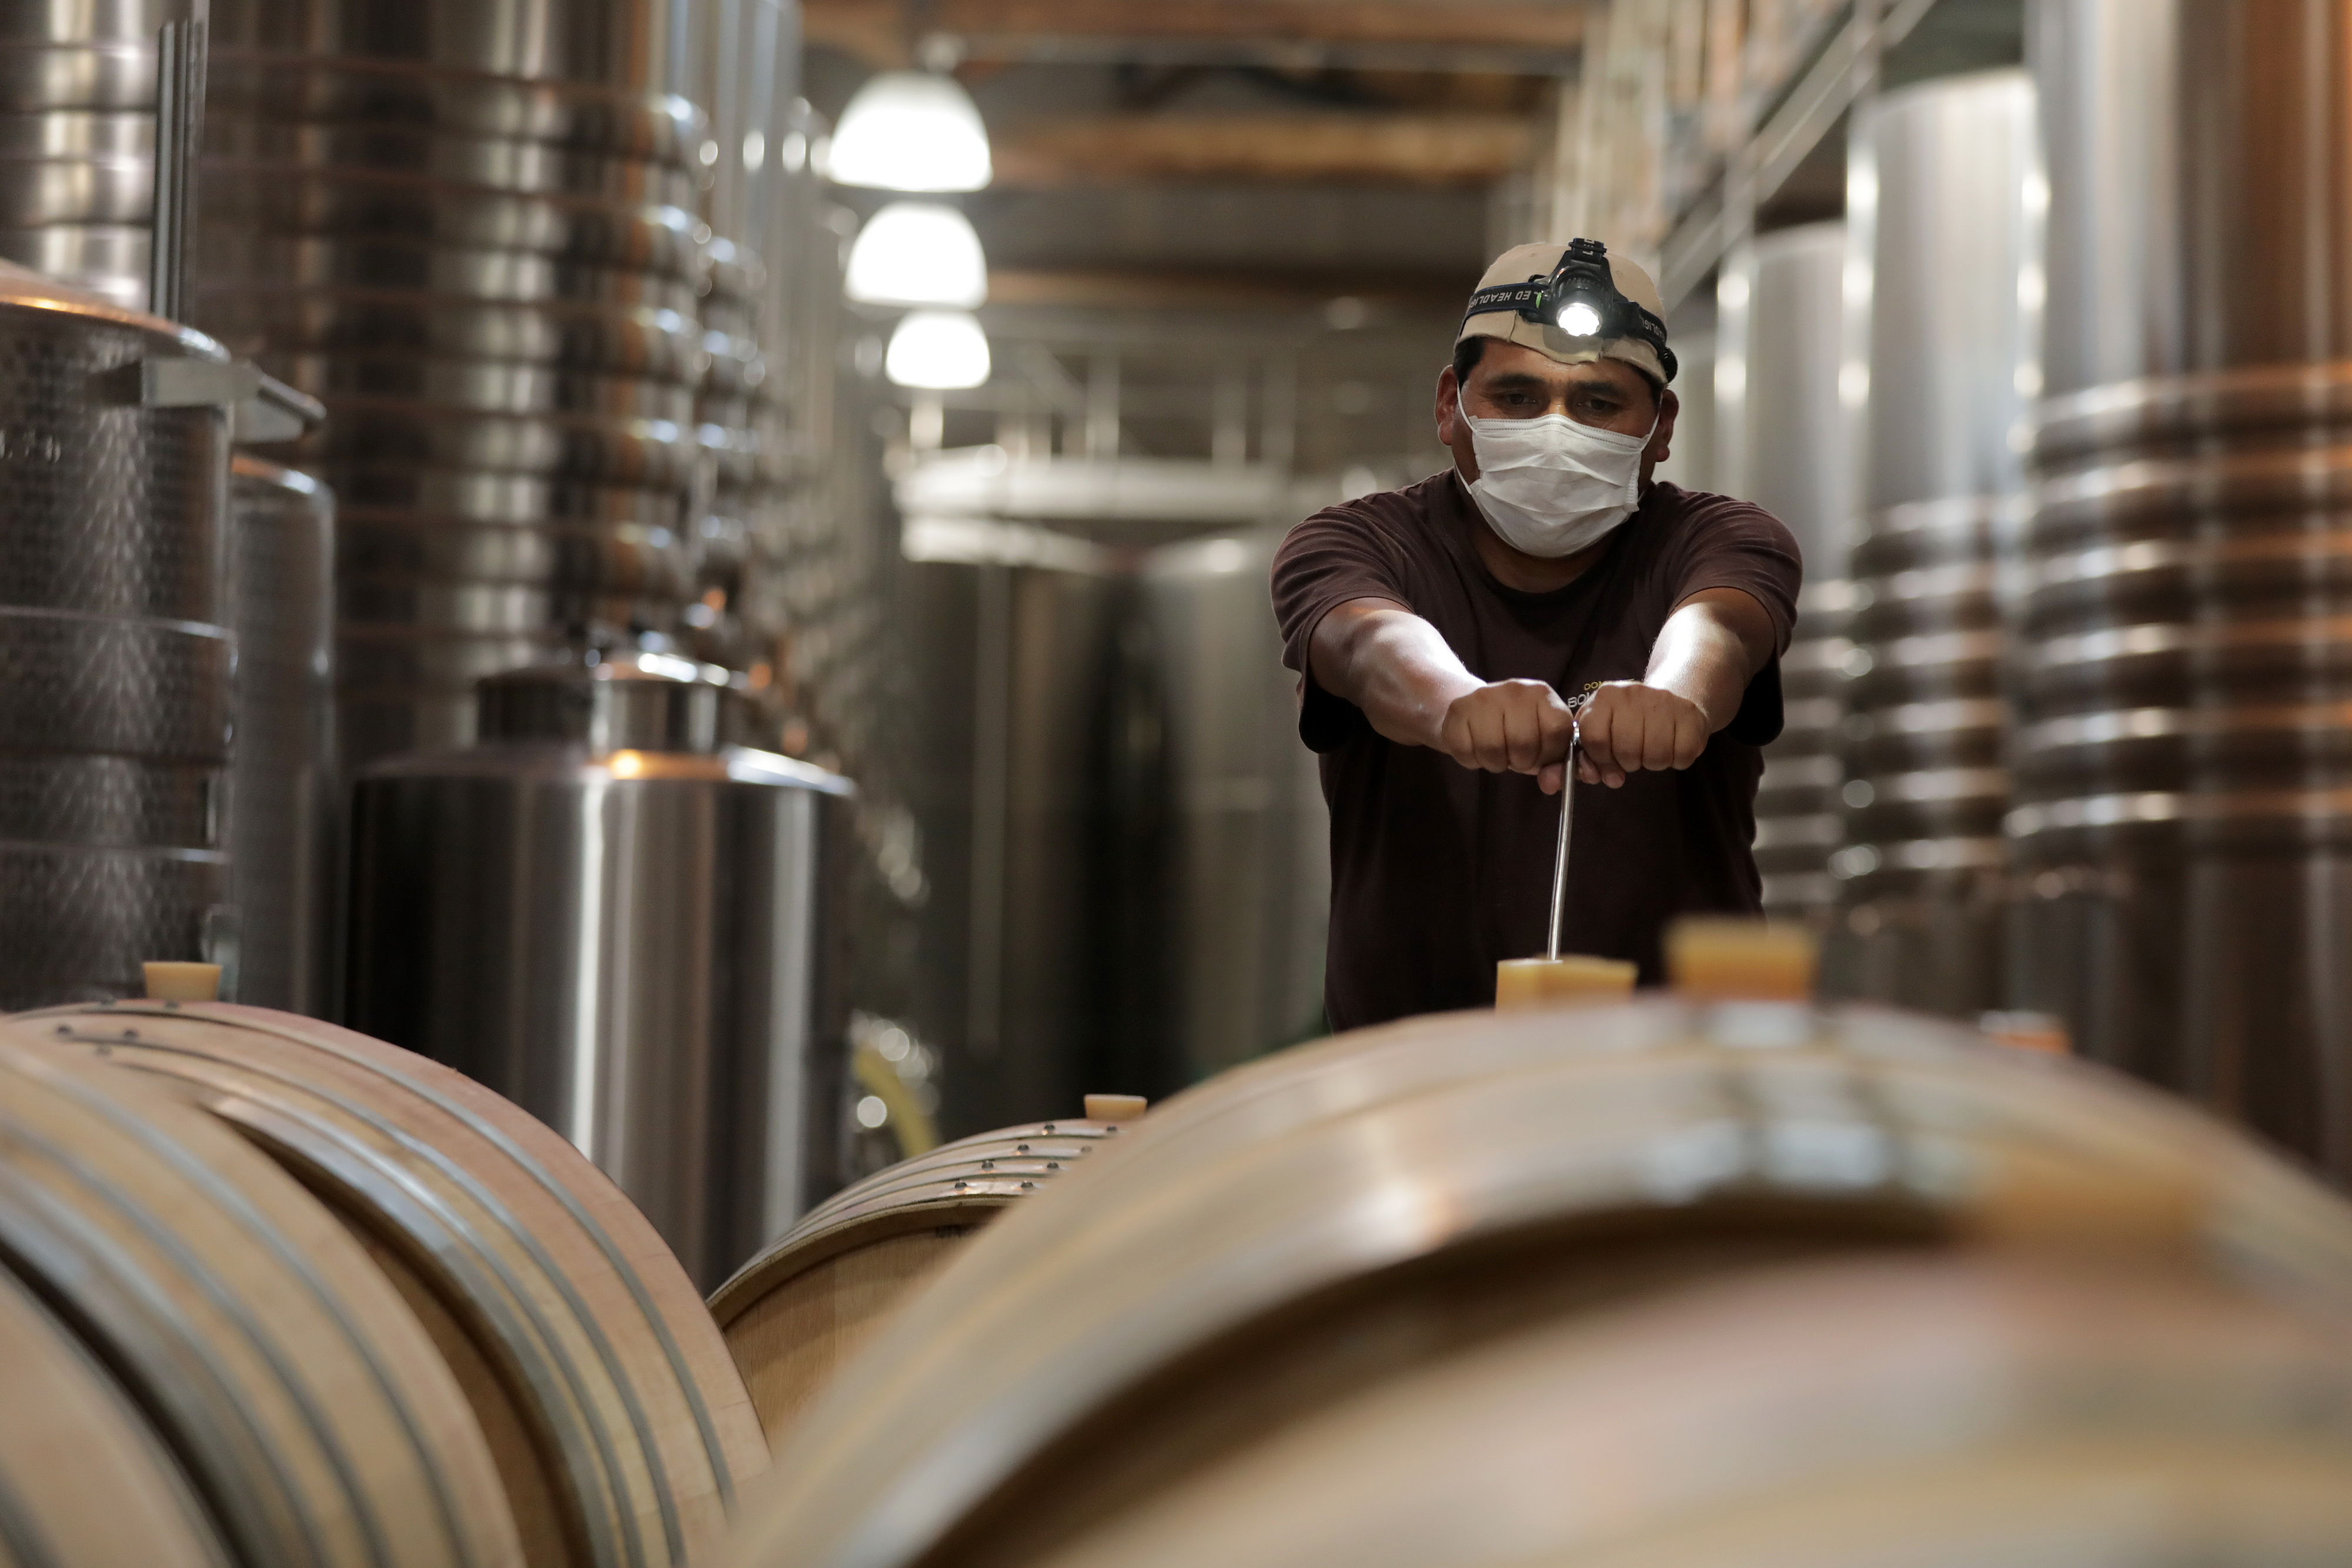 A COVID-19 masked winemaker pushes barrels of wine in the cellar